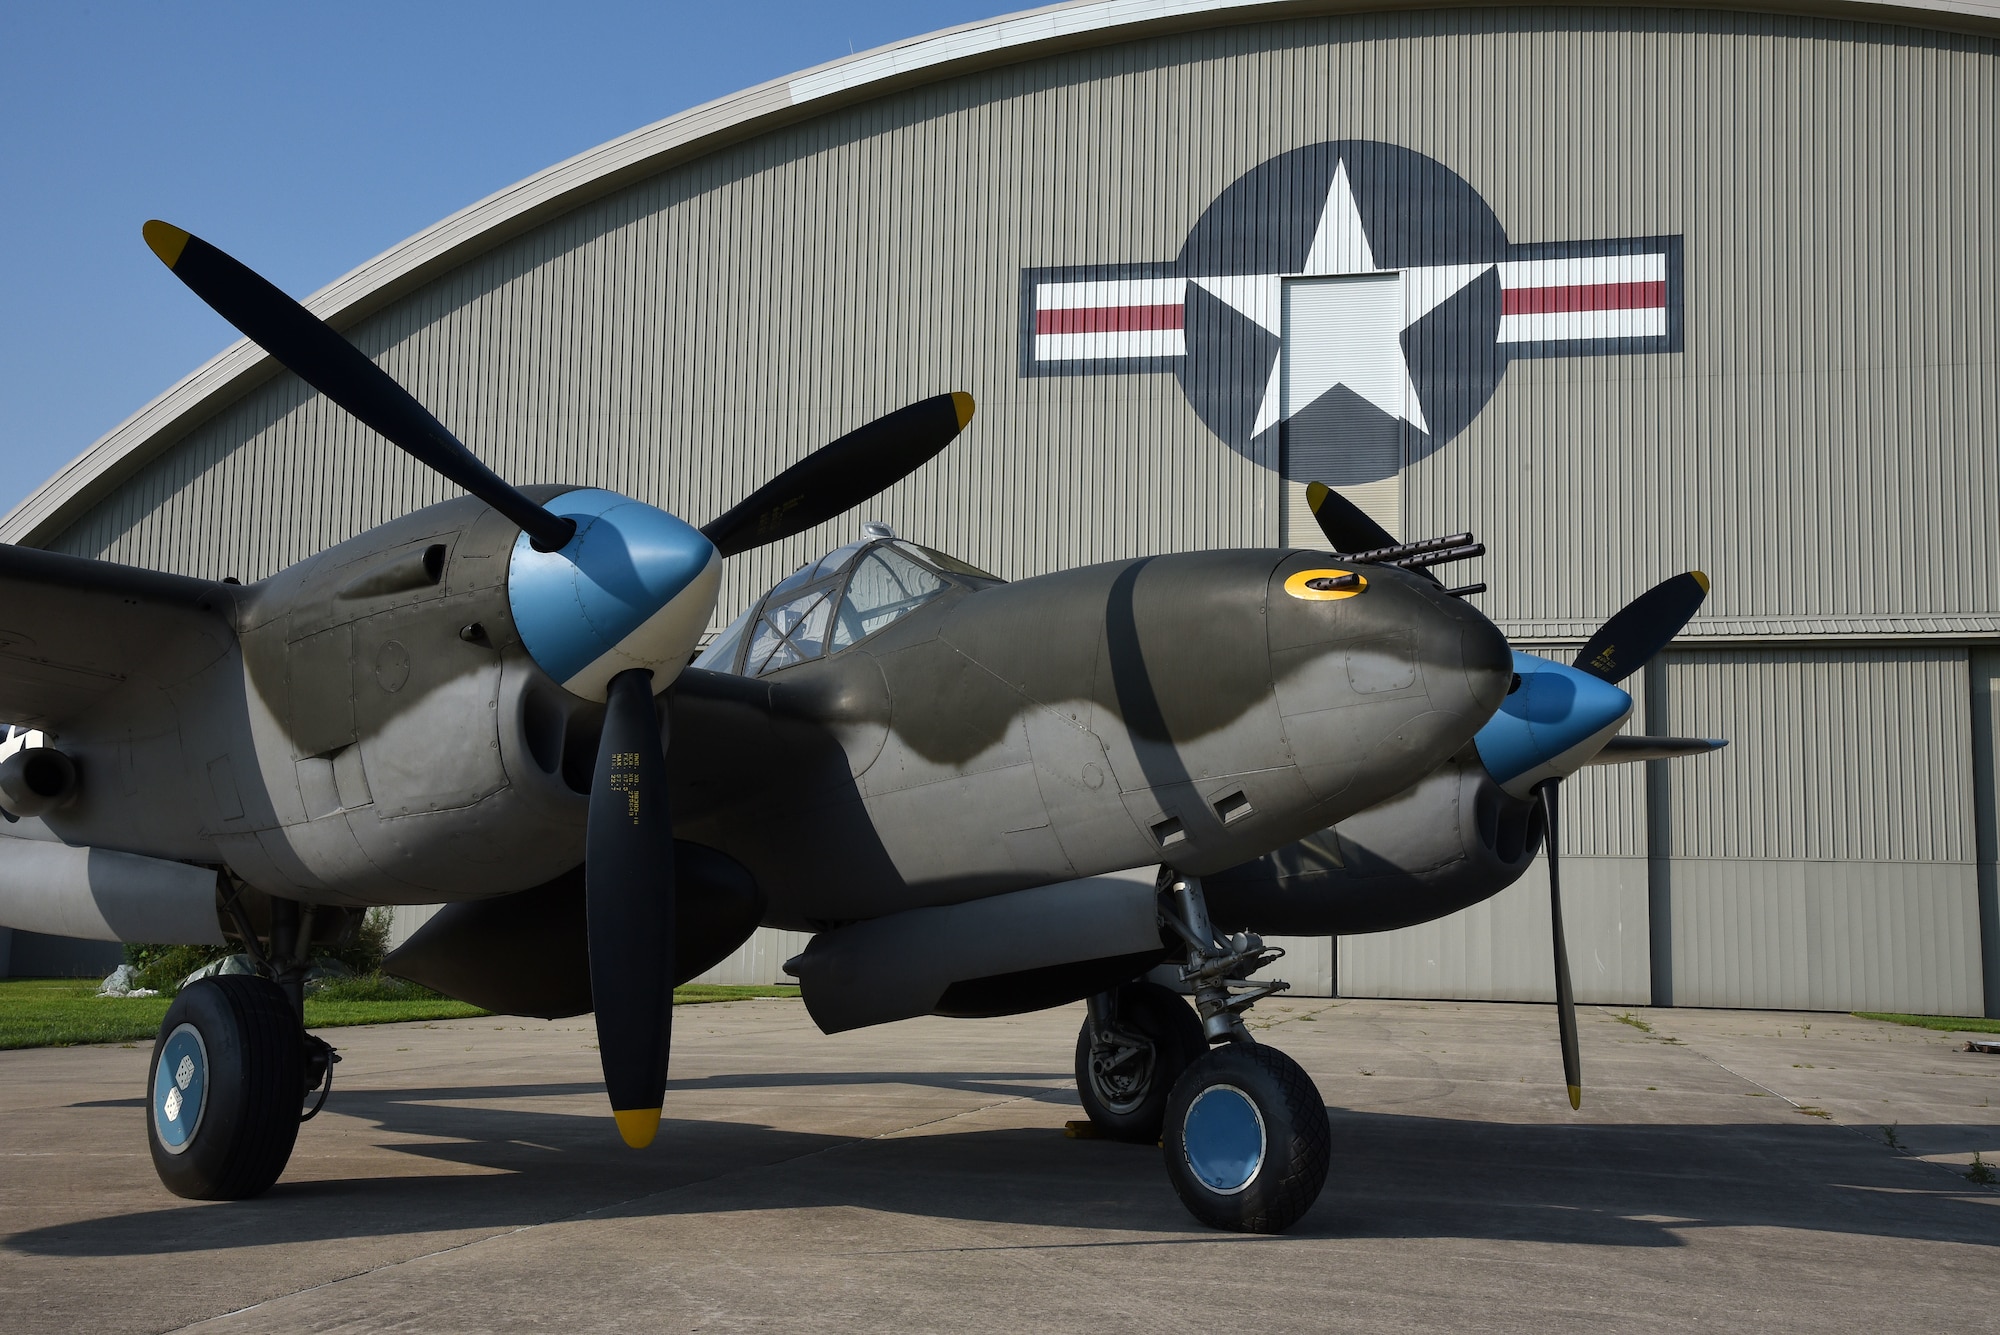 A view of the Lockheed P-38L Lightning before being towed to the WWII Gallery at the National Museum of the U.S. Air Force on Aug. 13, 2018. Several WWII era aircraft on display were temporarily placed throughout the museum to provide adequate space for the Memphis Belle exhibit opening events. (U.S. Air Force photo by Ken LaRock)